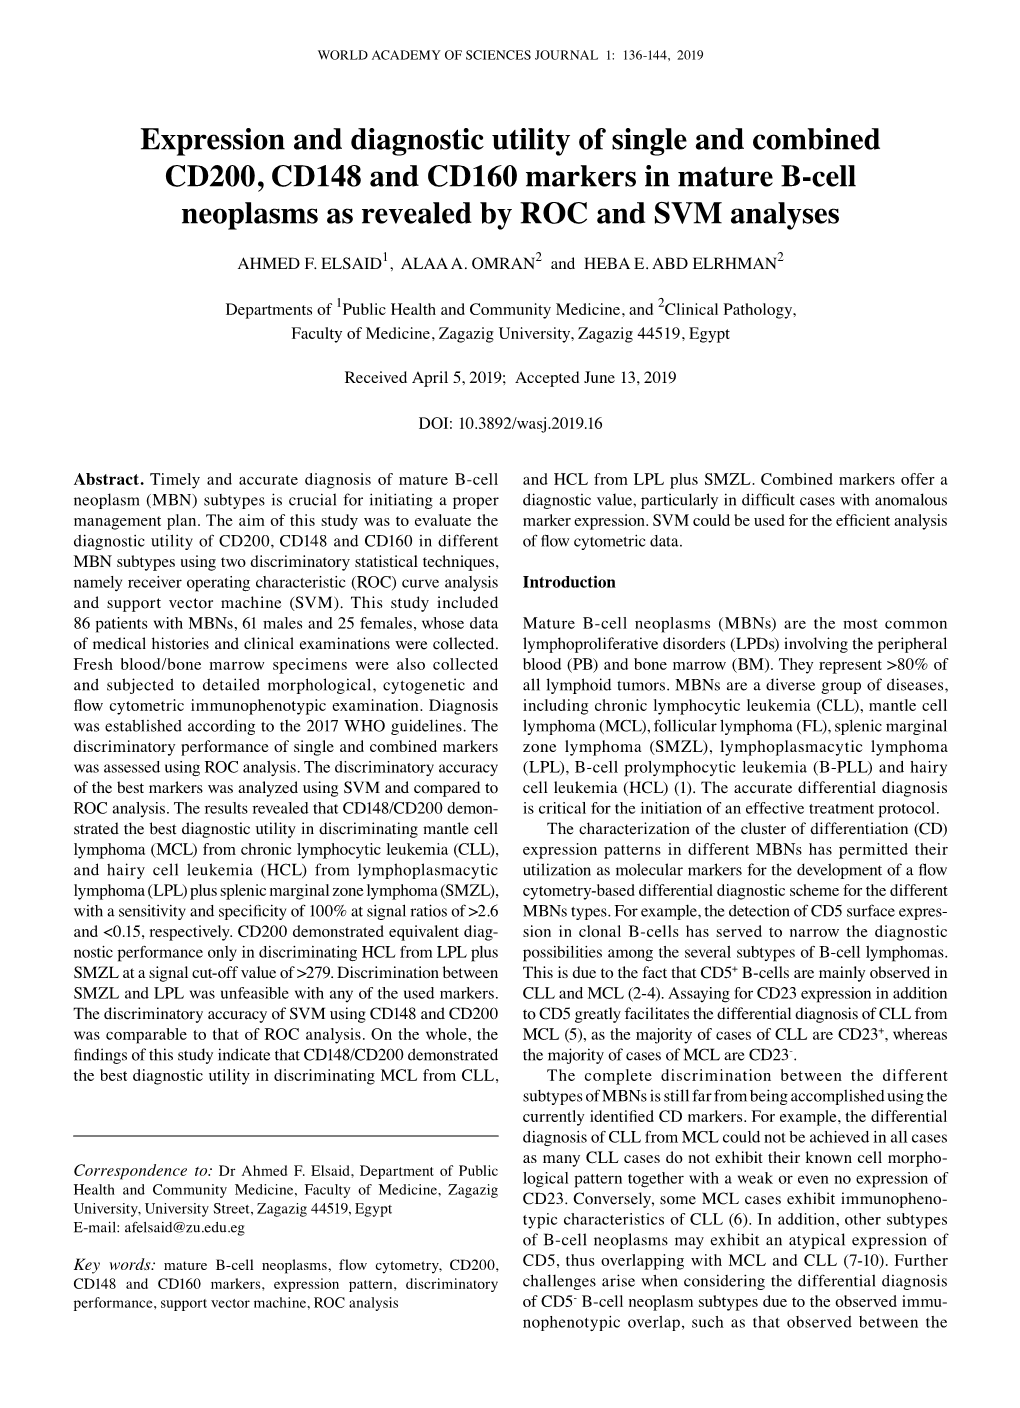 Expression and Diagnostic Utility of Single and Combined CD200, CD148 and CD160 Markers in Mature B‑Cell Neoplasms As Revealed by ROC and SVM Analyses